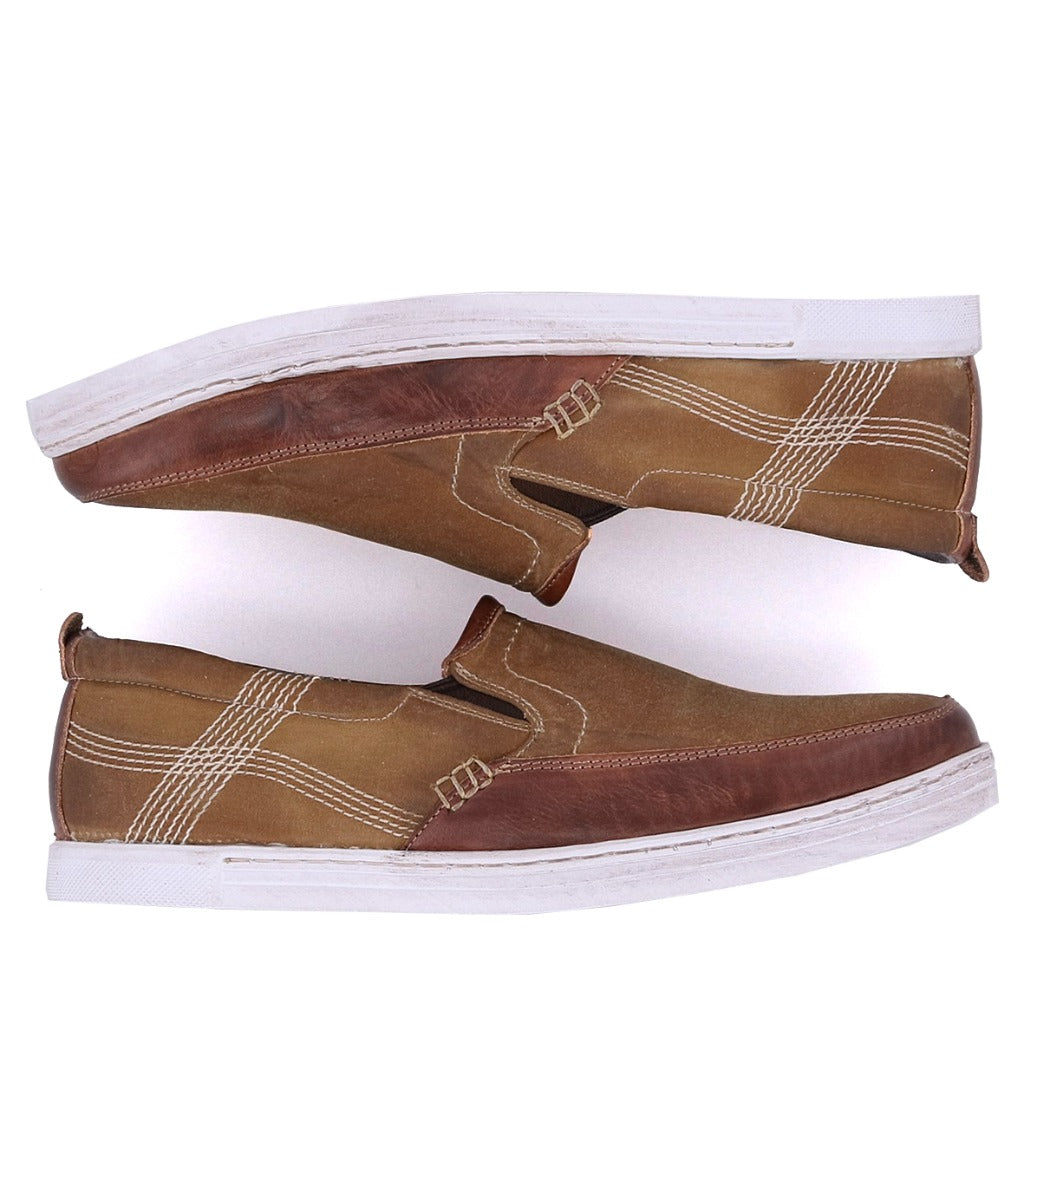 A pair of Bed Stu Carp brown slip on shoes on a white background.